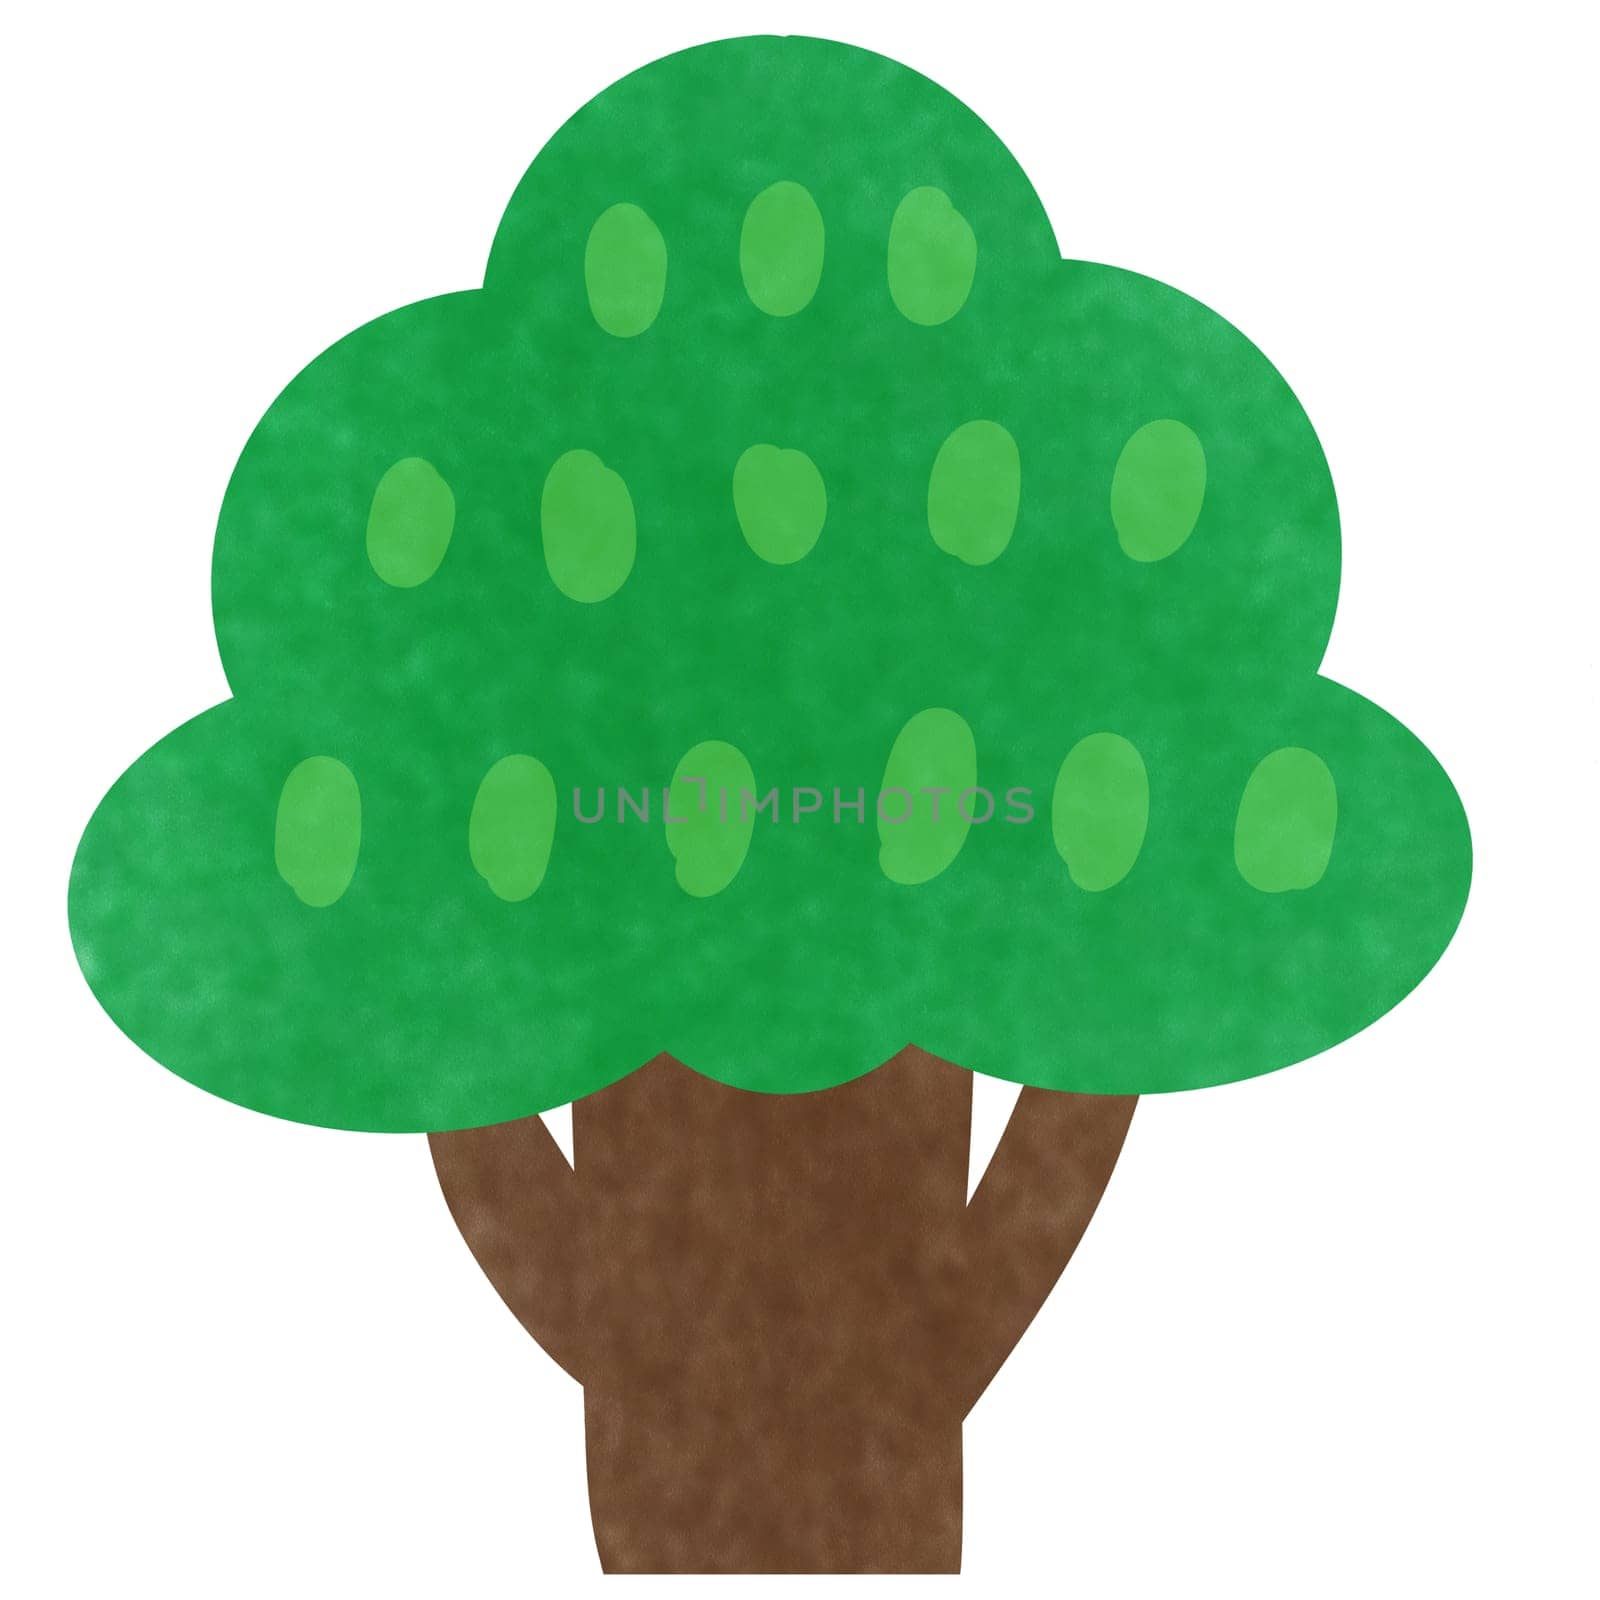 Drawing of green tree on white background for usage as an illustration, nature decoration and springtime concept